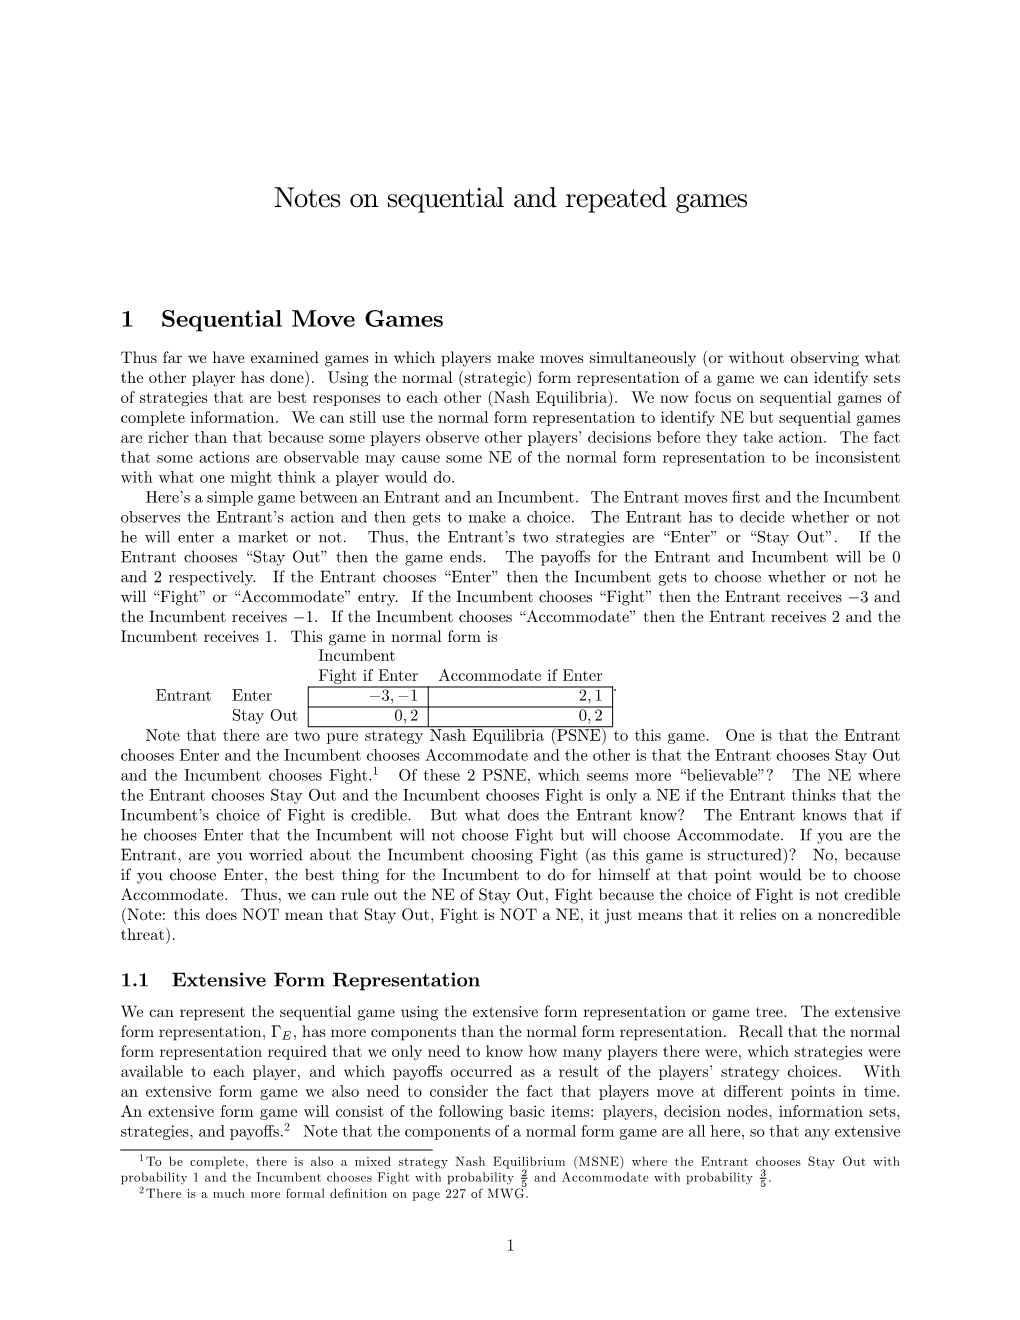 Notes on Sequential and Repeated Games